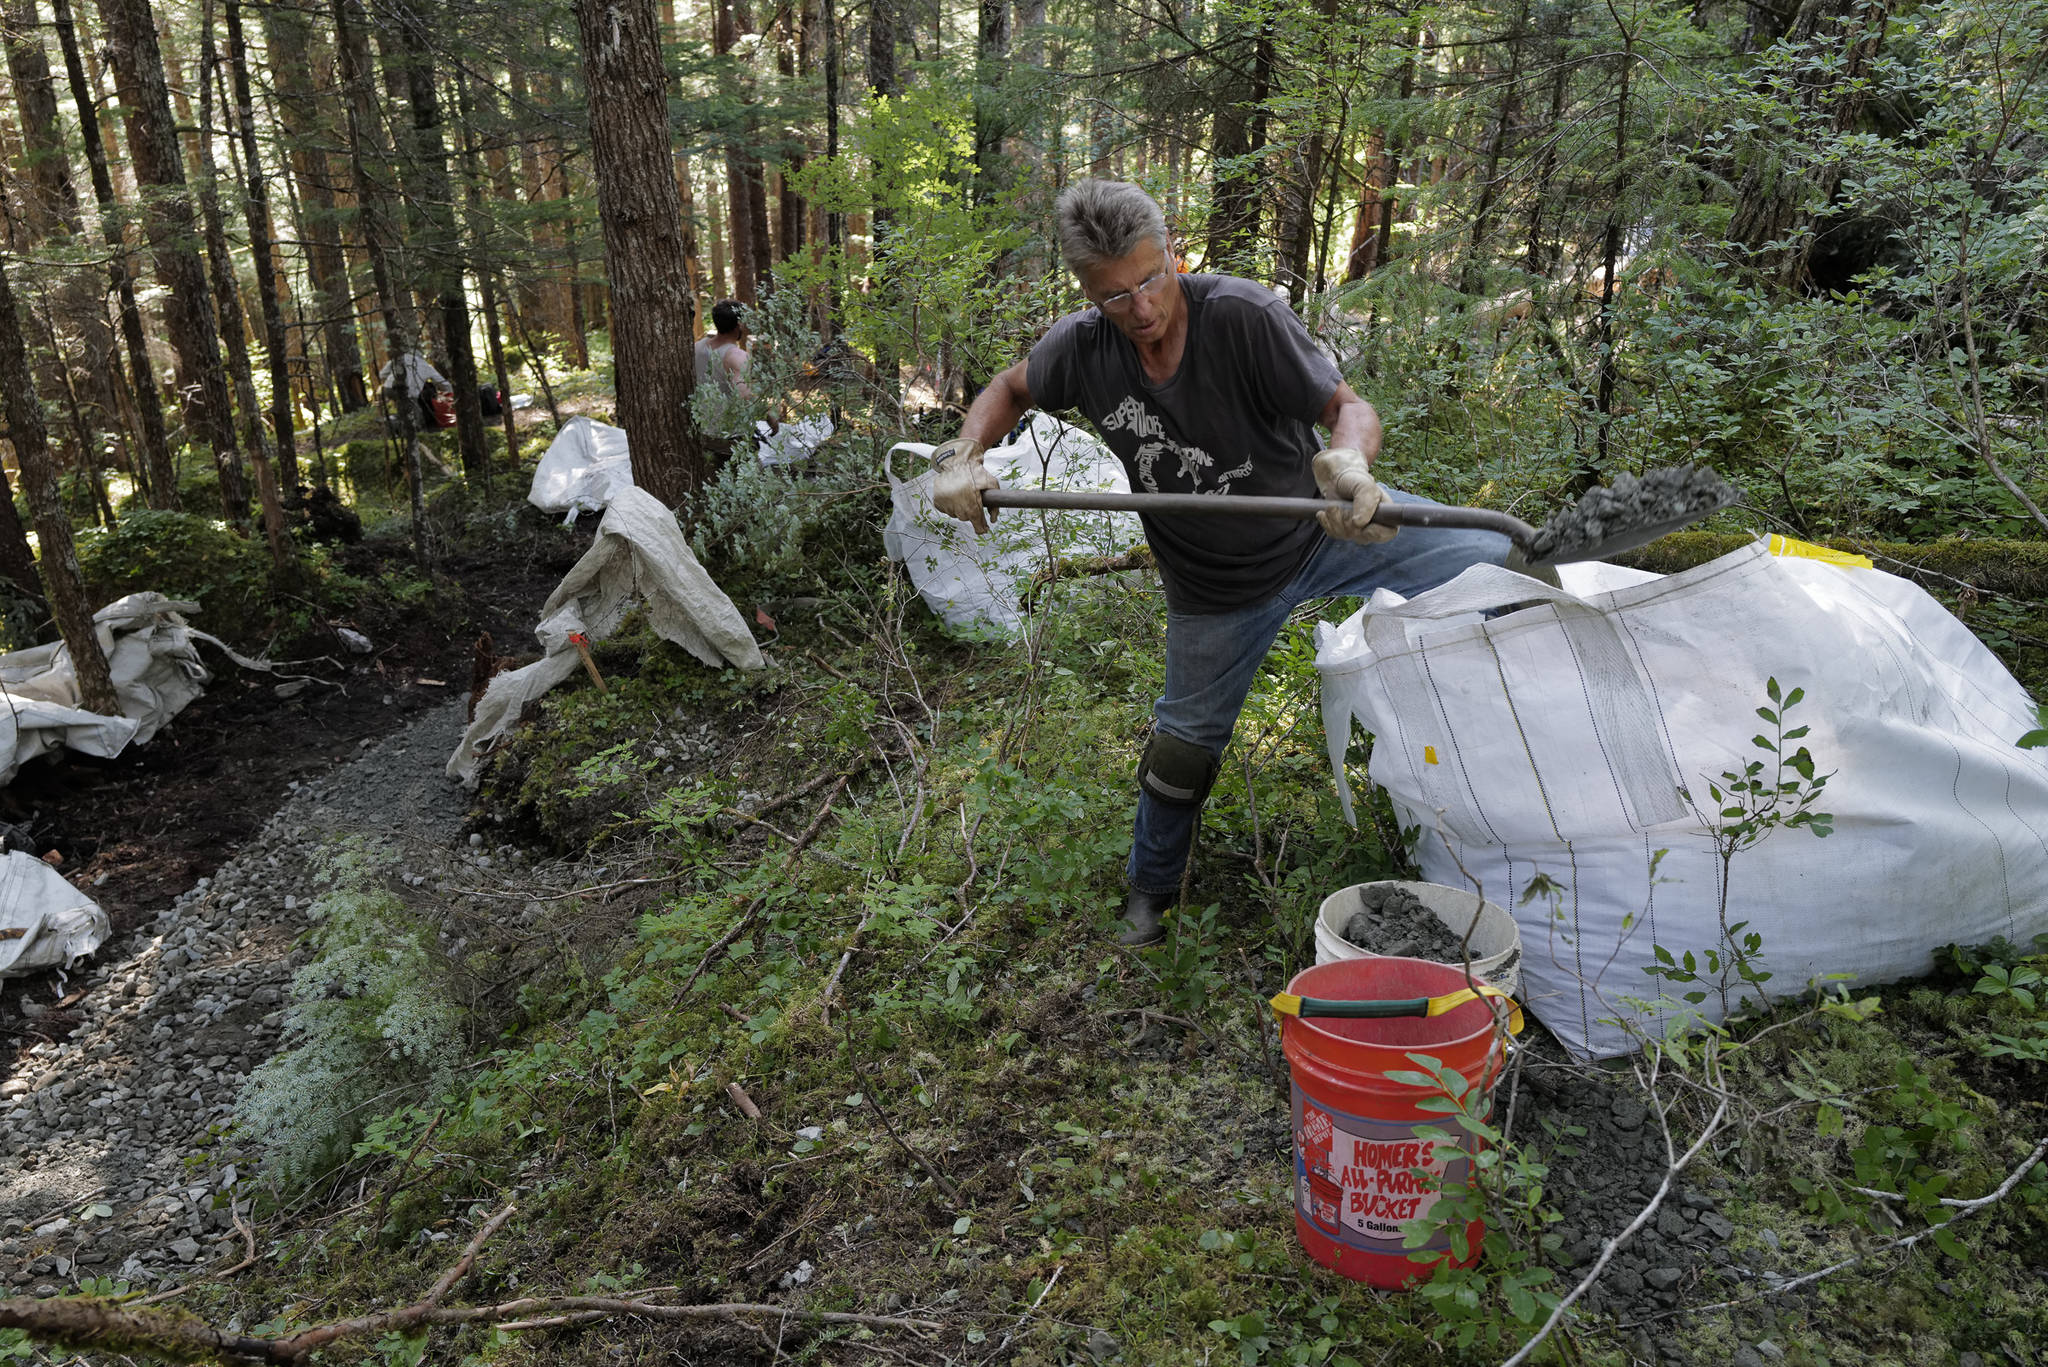 Volunteer Dave Haas shovels gravel for a new Treadwell Gorge reroute trail on the Treadwell Ditch Trail on Thursday, Aug. 8, 2019. (Michael Penn | Juneau Empire)